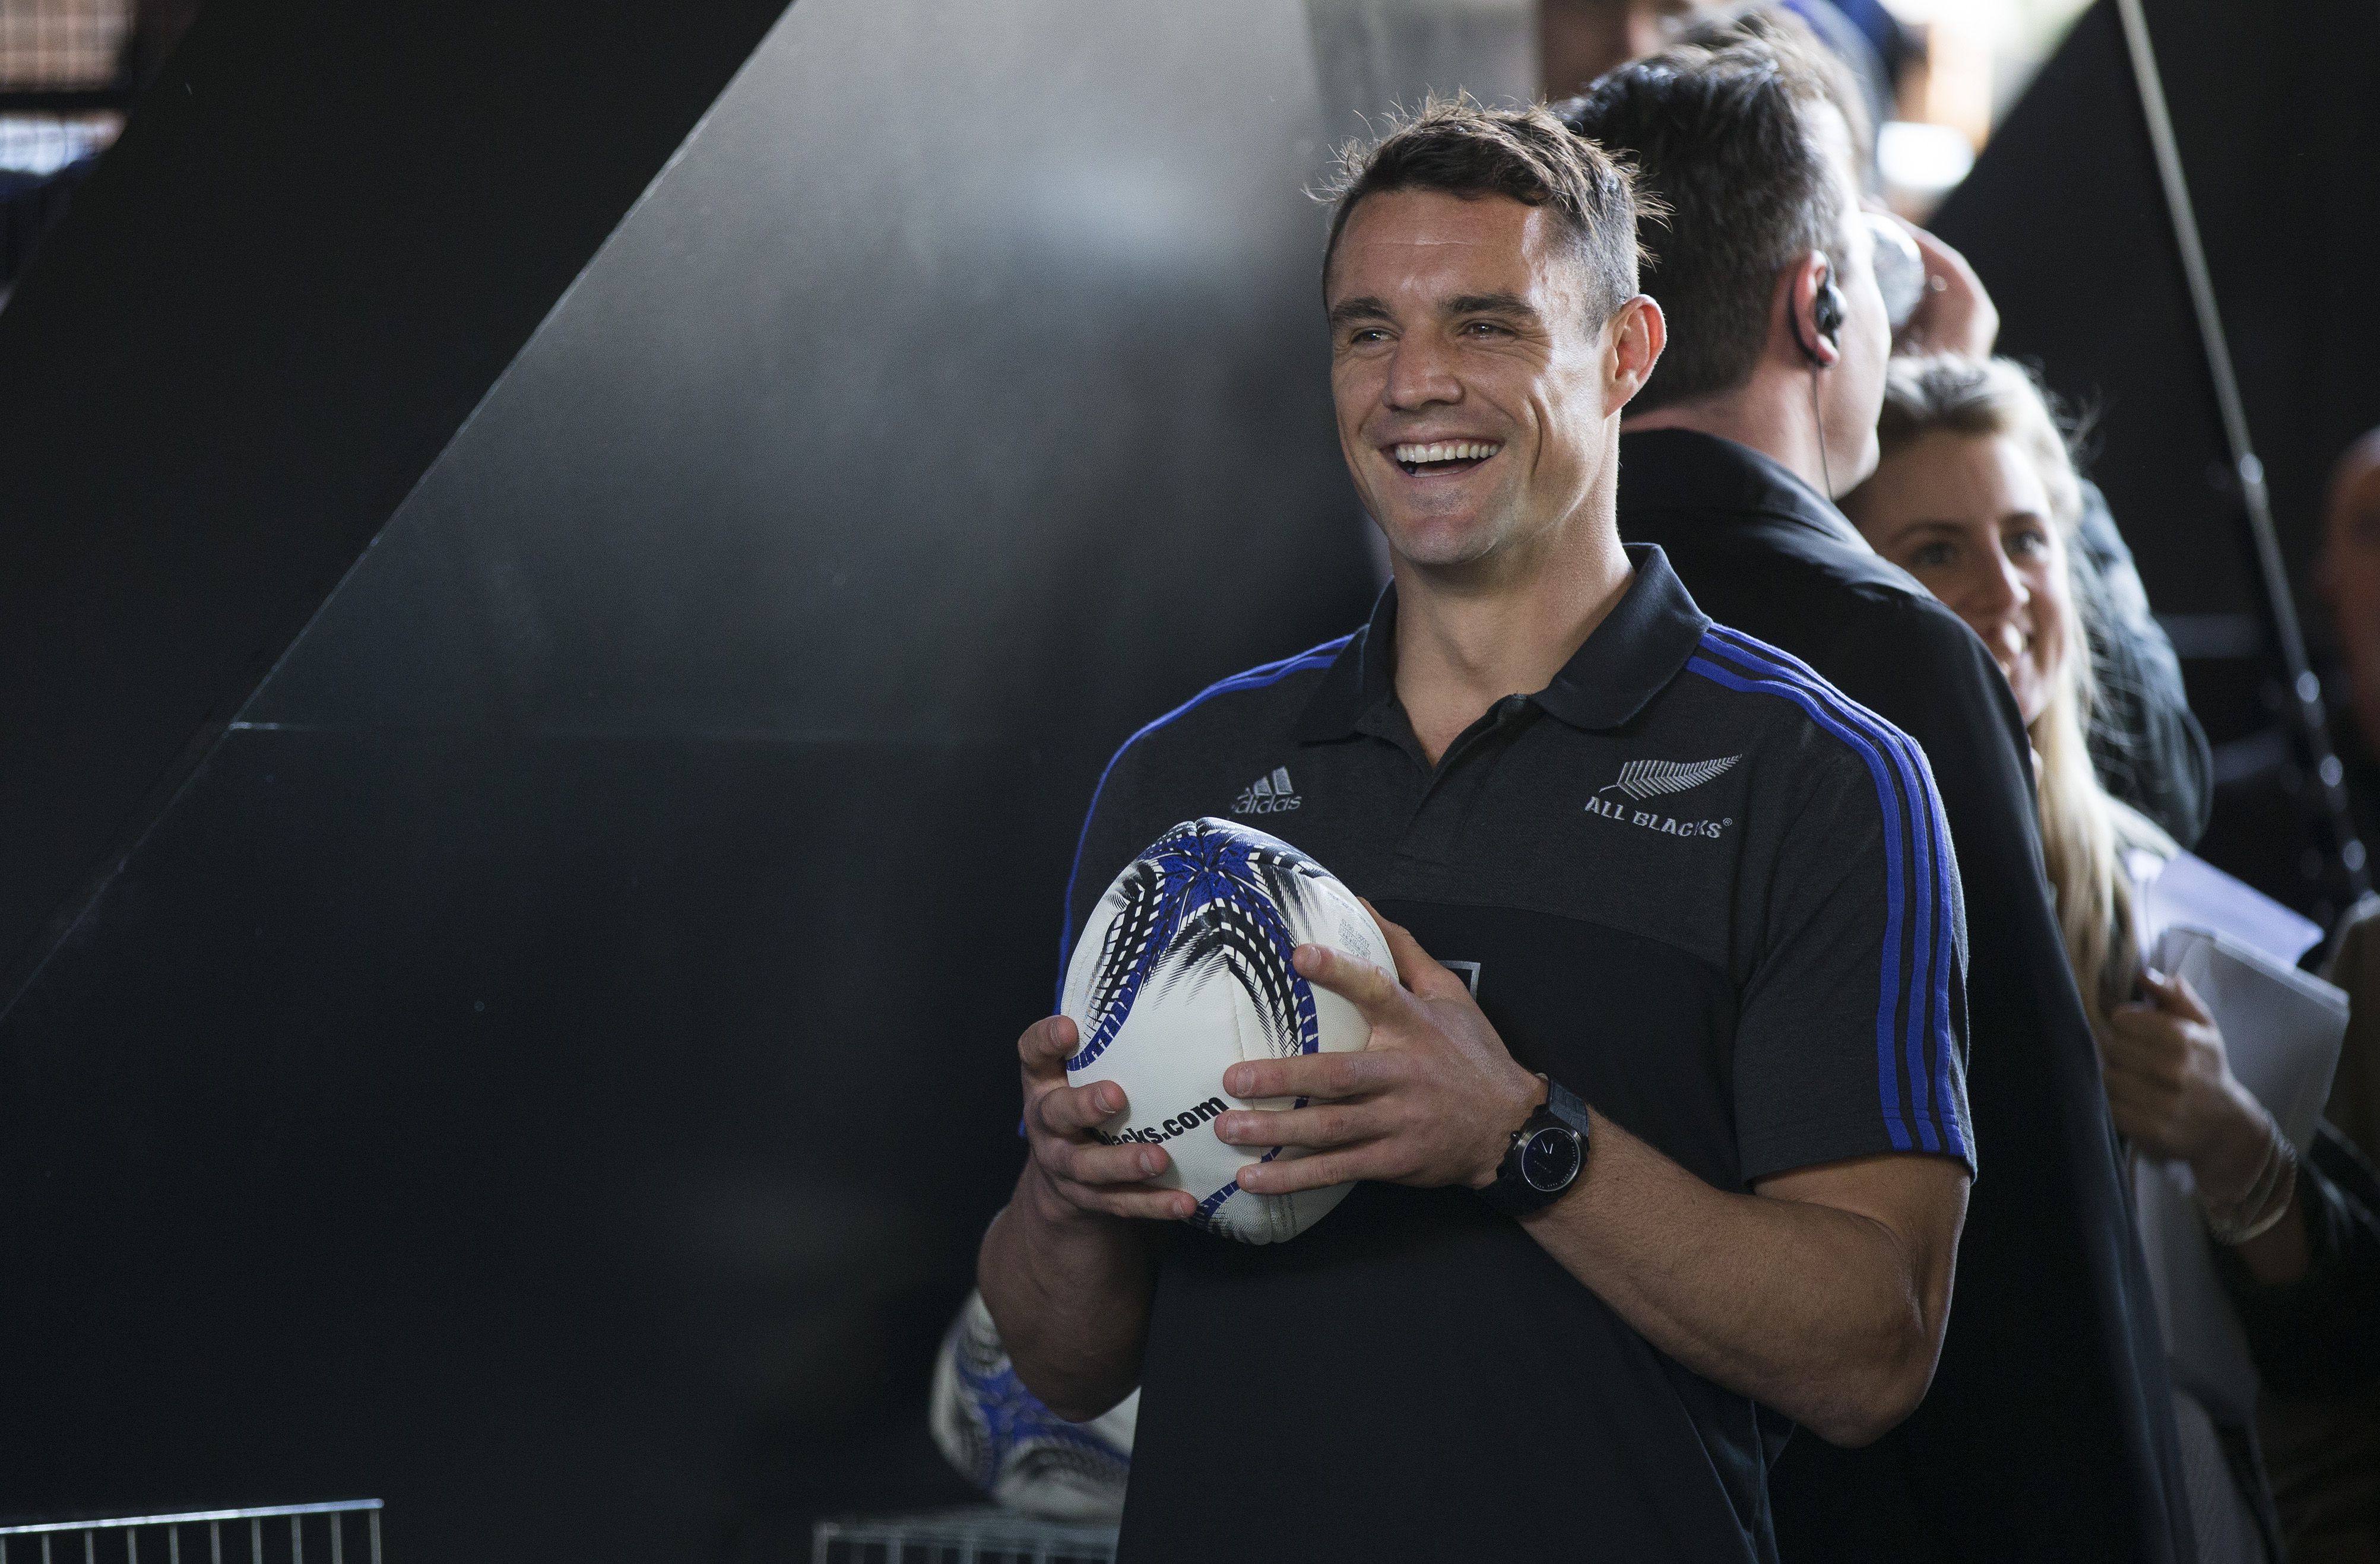 Dan Carter amazed at crowd of 90,000 for French final - NZ Herald